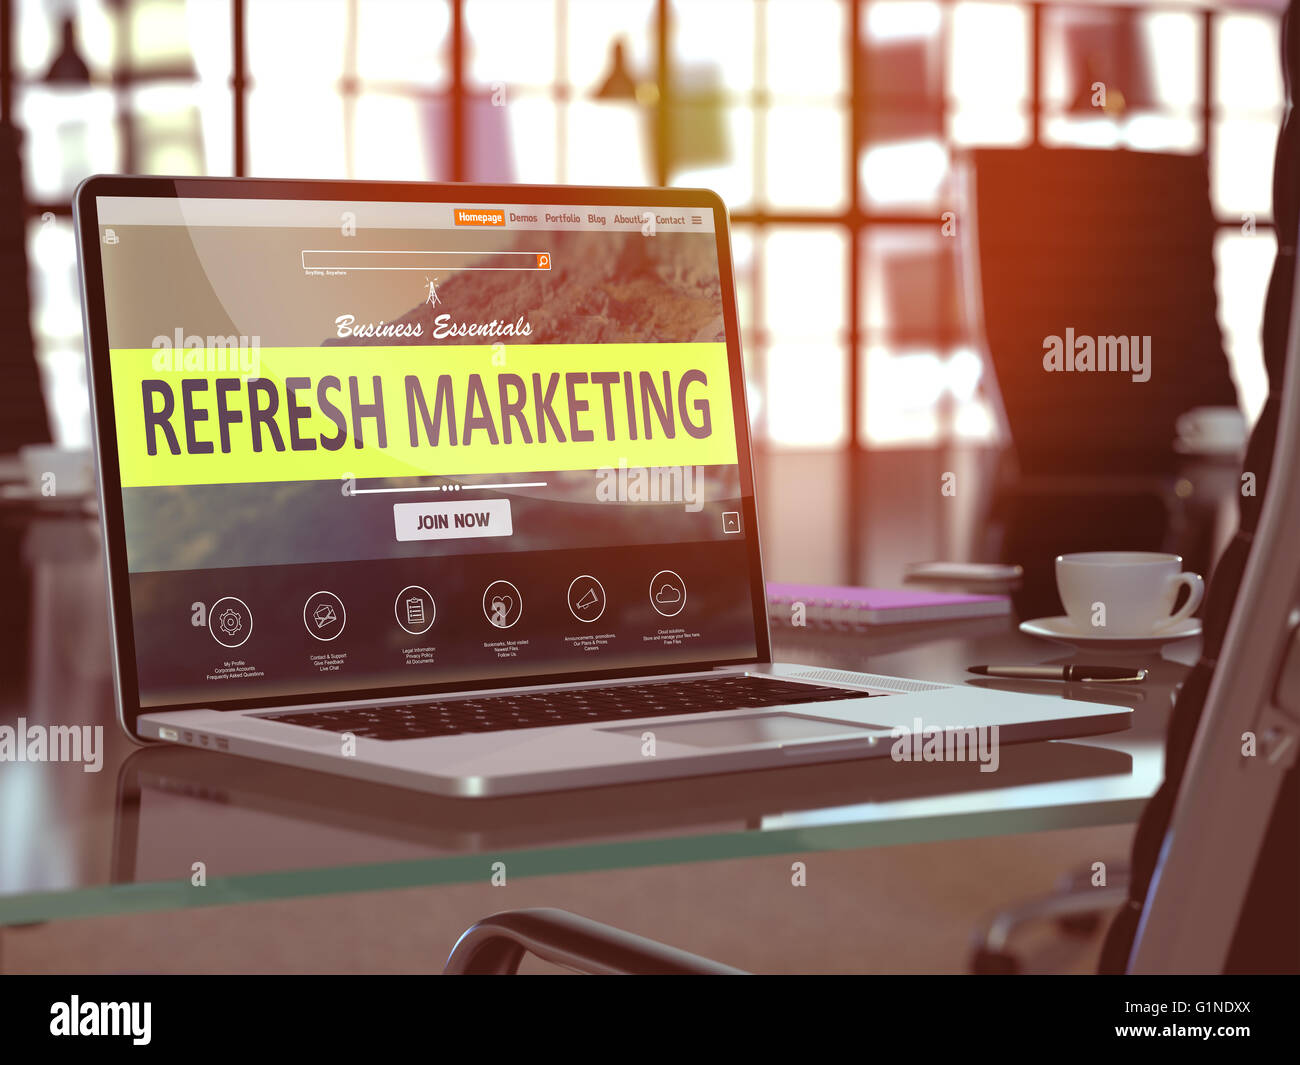 Laptop Screen with Refresh Marketing Concept. Stock Photo